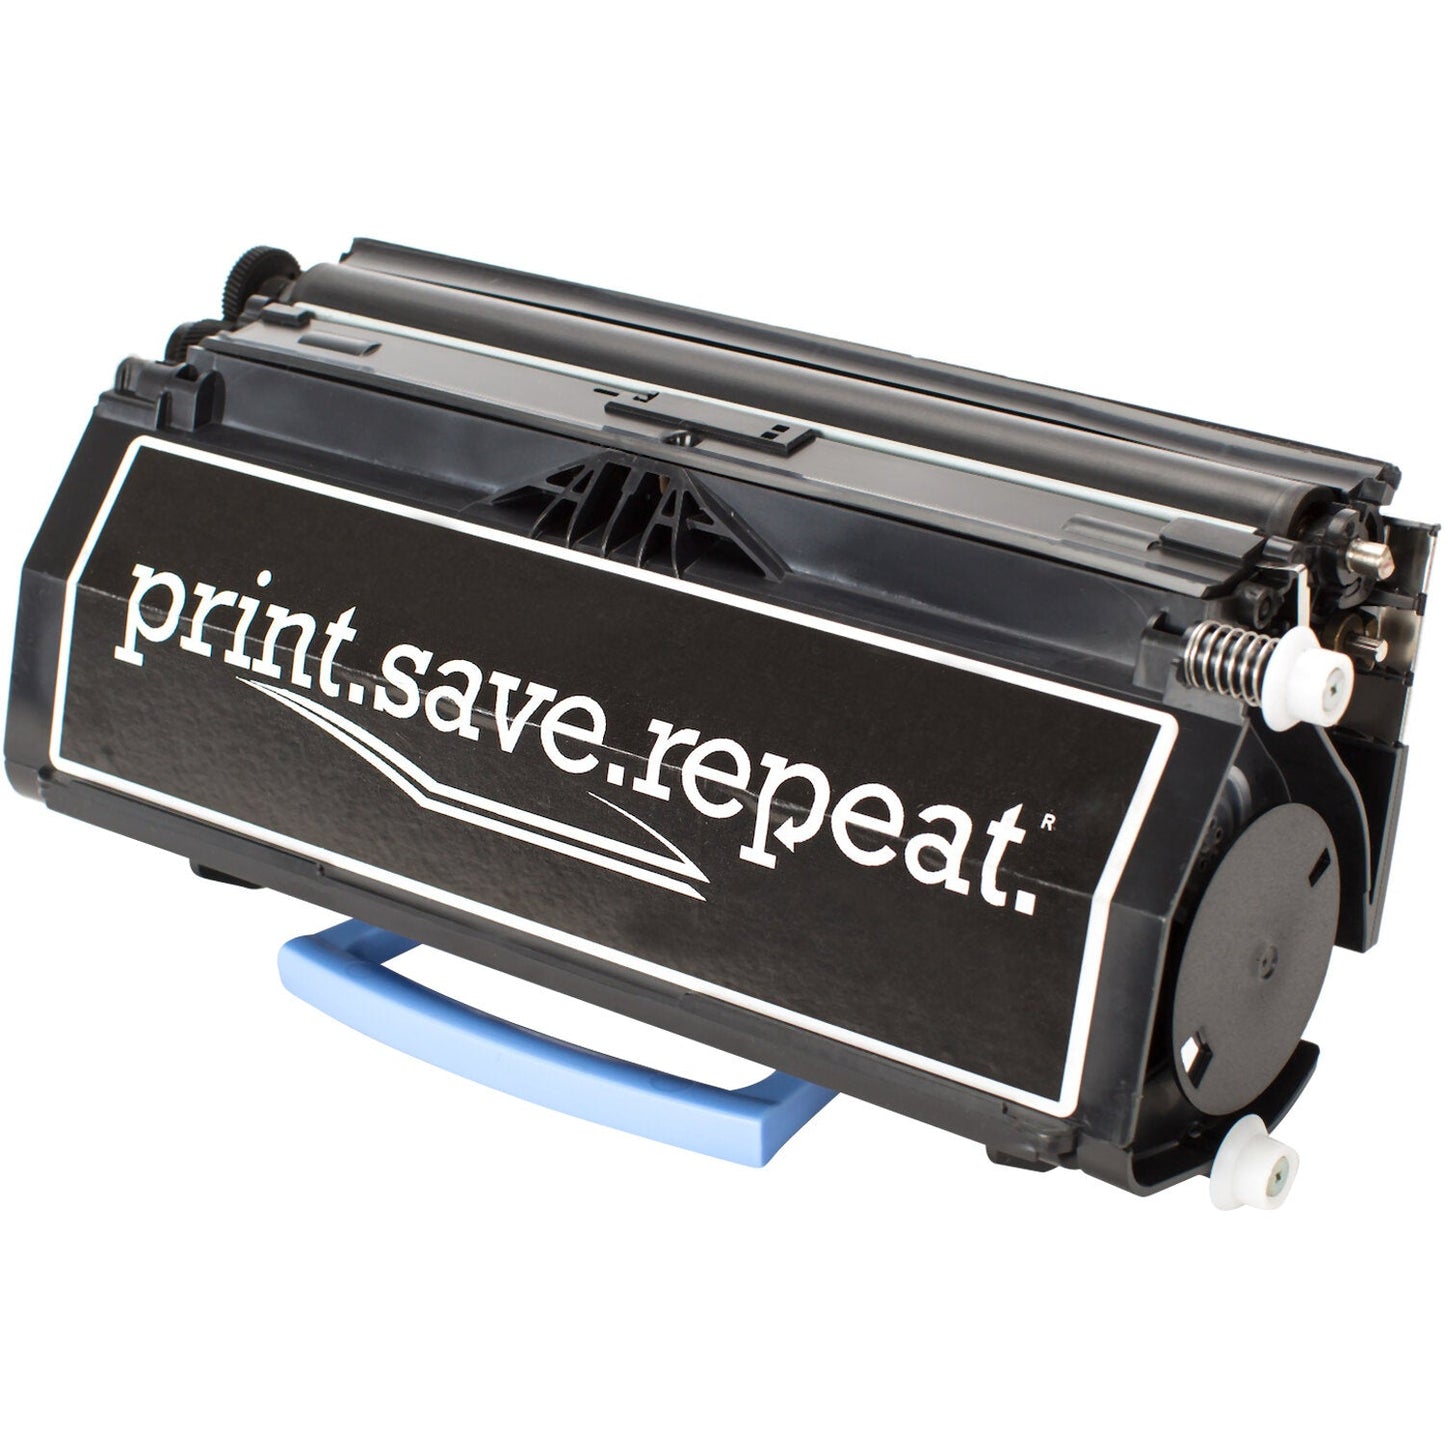 Print.Save.Repeat. Lexmark E460X11A Extra High Yield Remanufactured Toner Cartridge for E460, E462 [15,000 Pages]